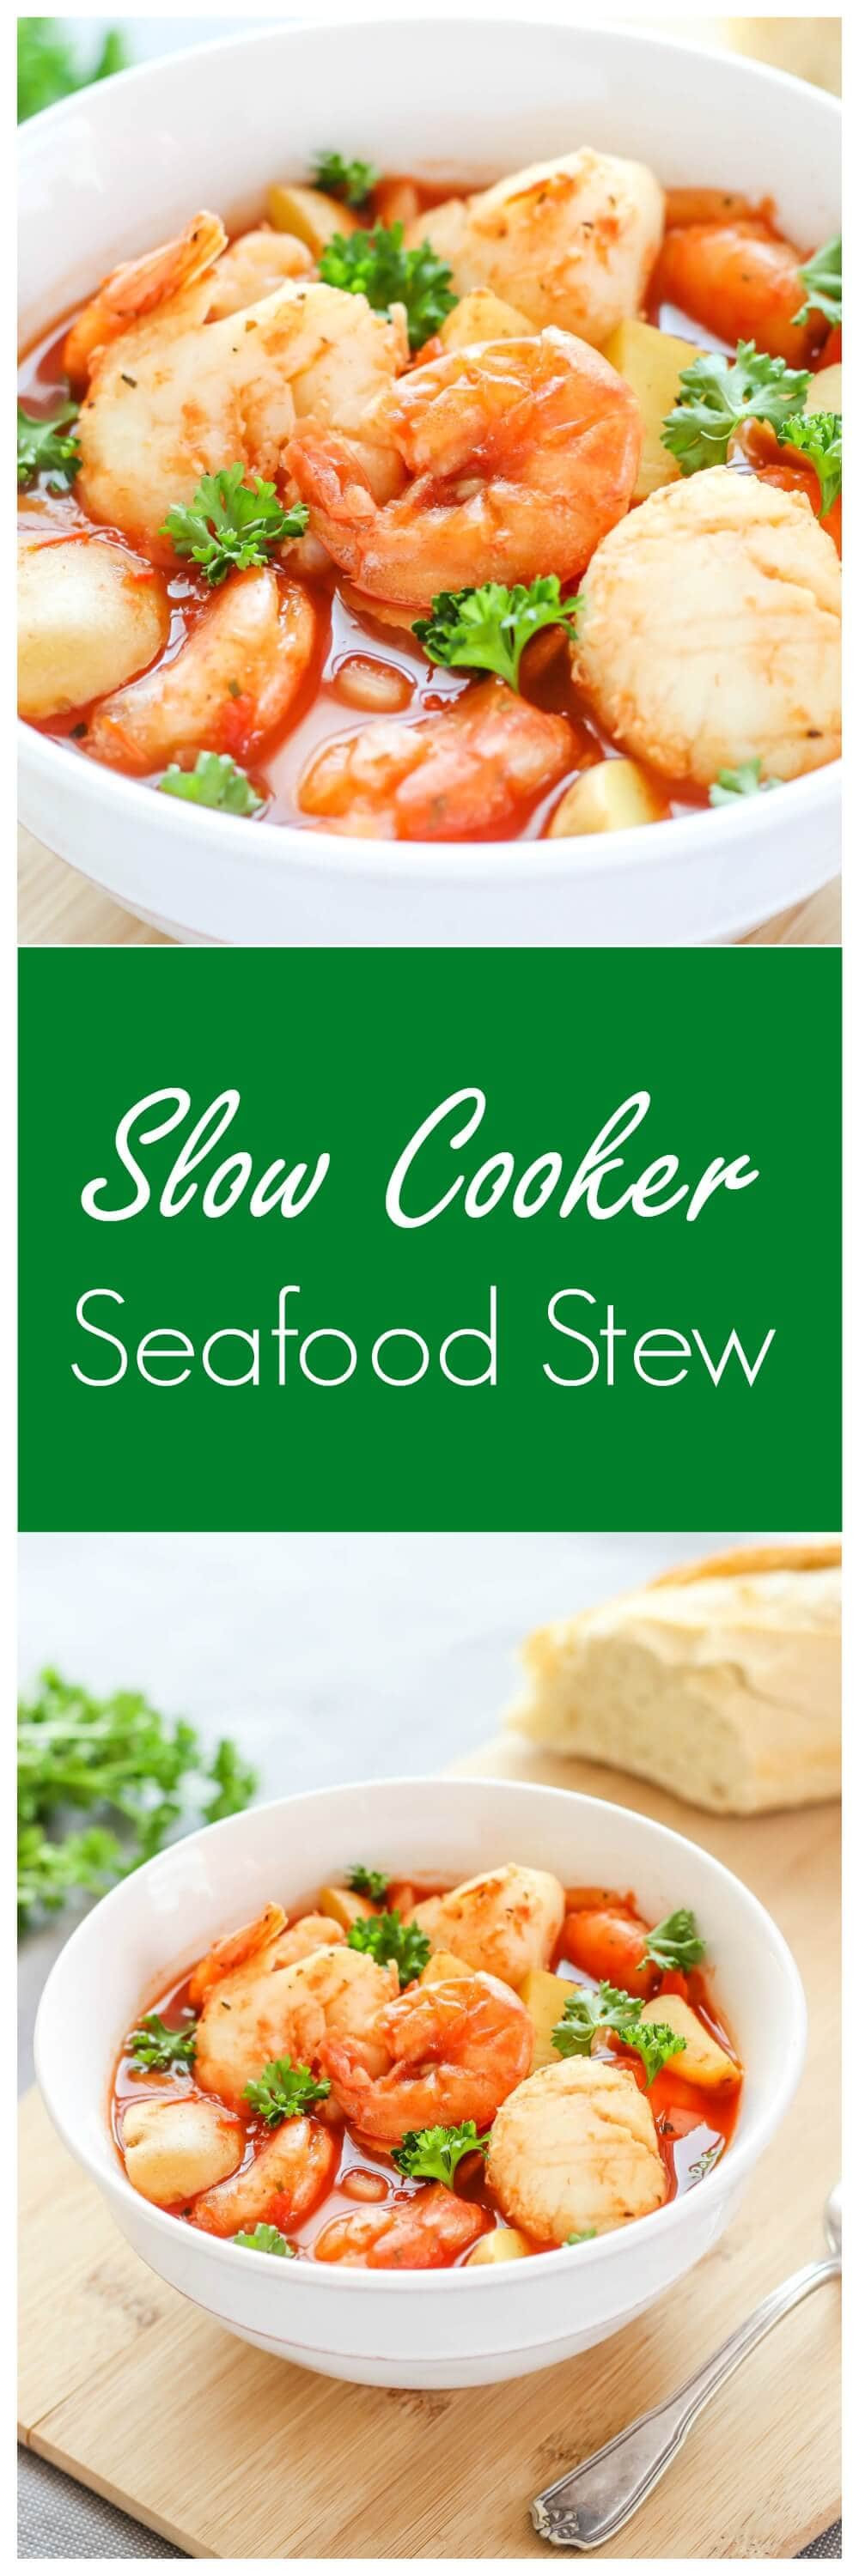 Fish Slow Cooker Recipes Healthy Best 20 Healthy Slow Cooker Fish Recipes